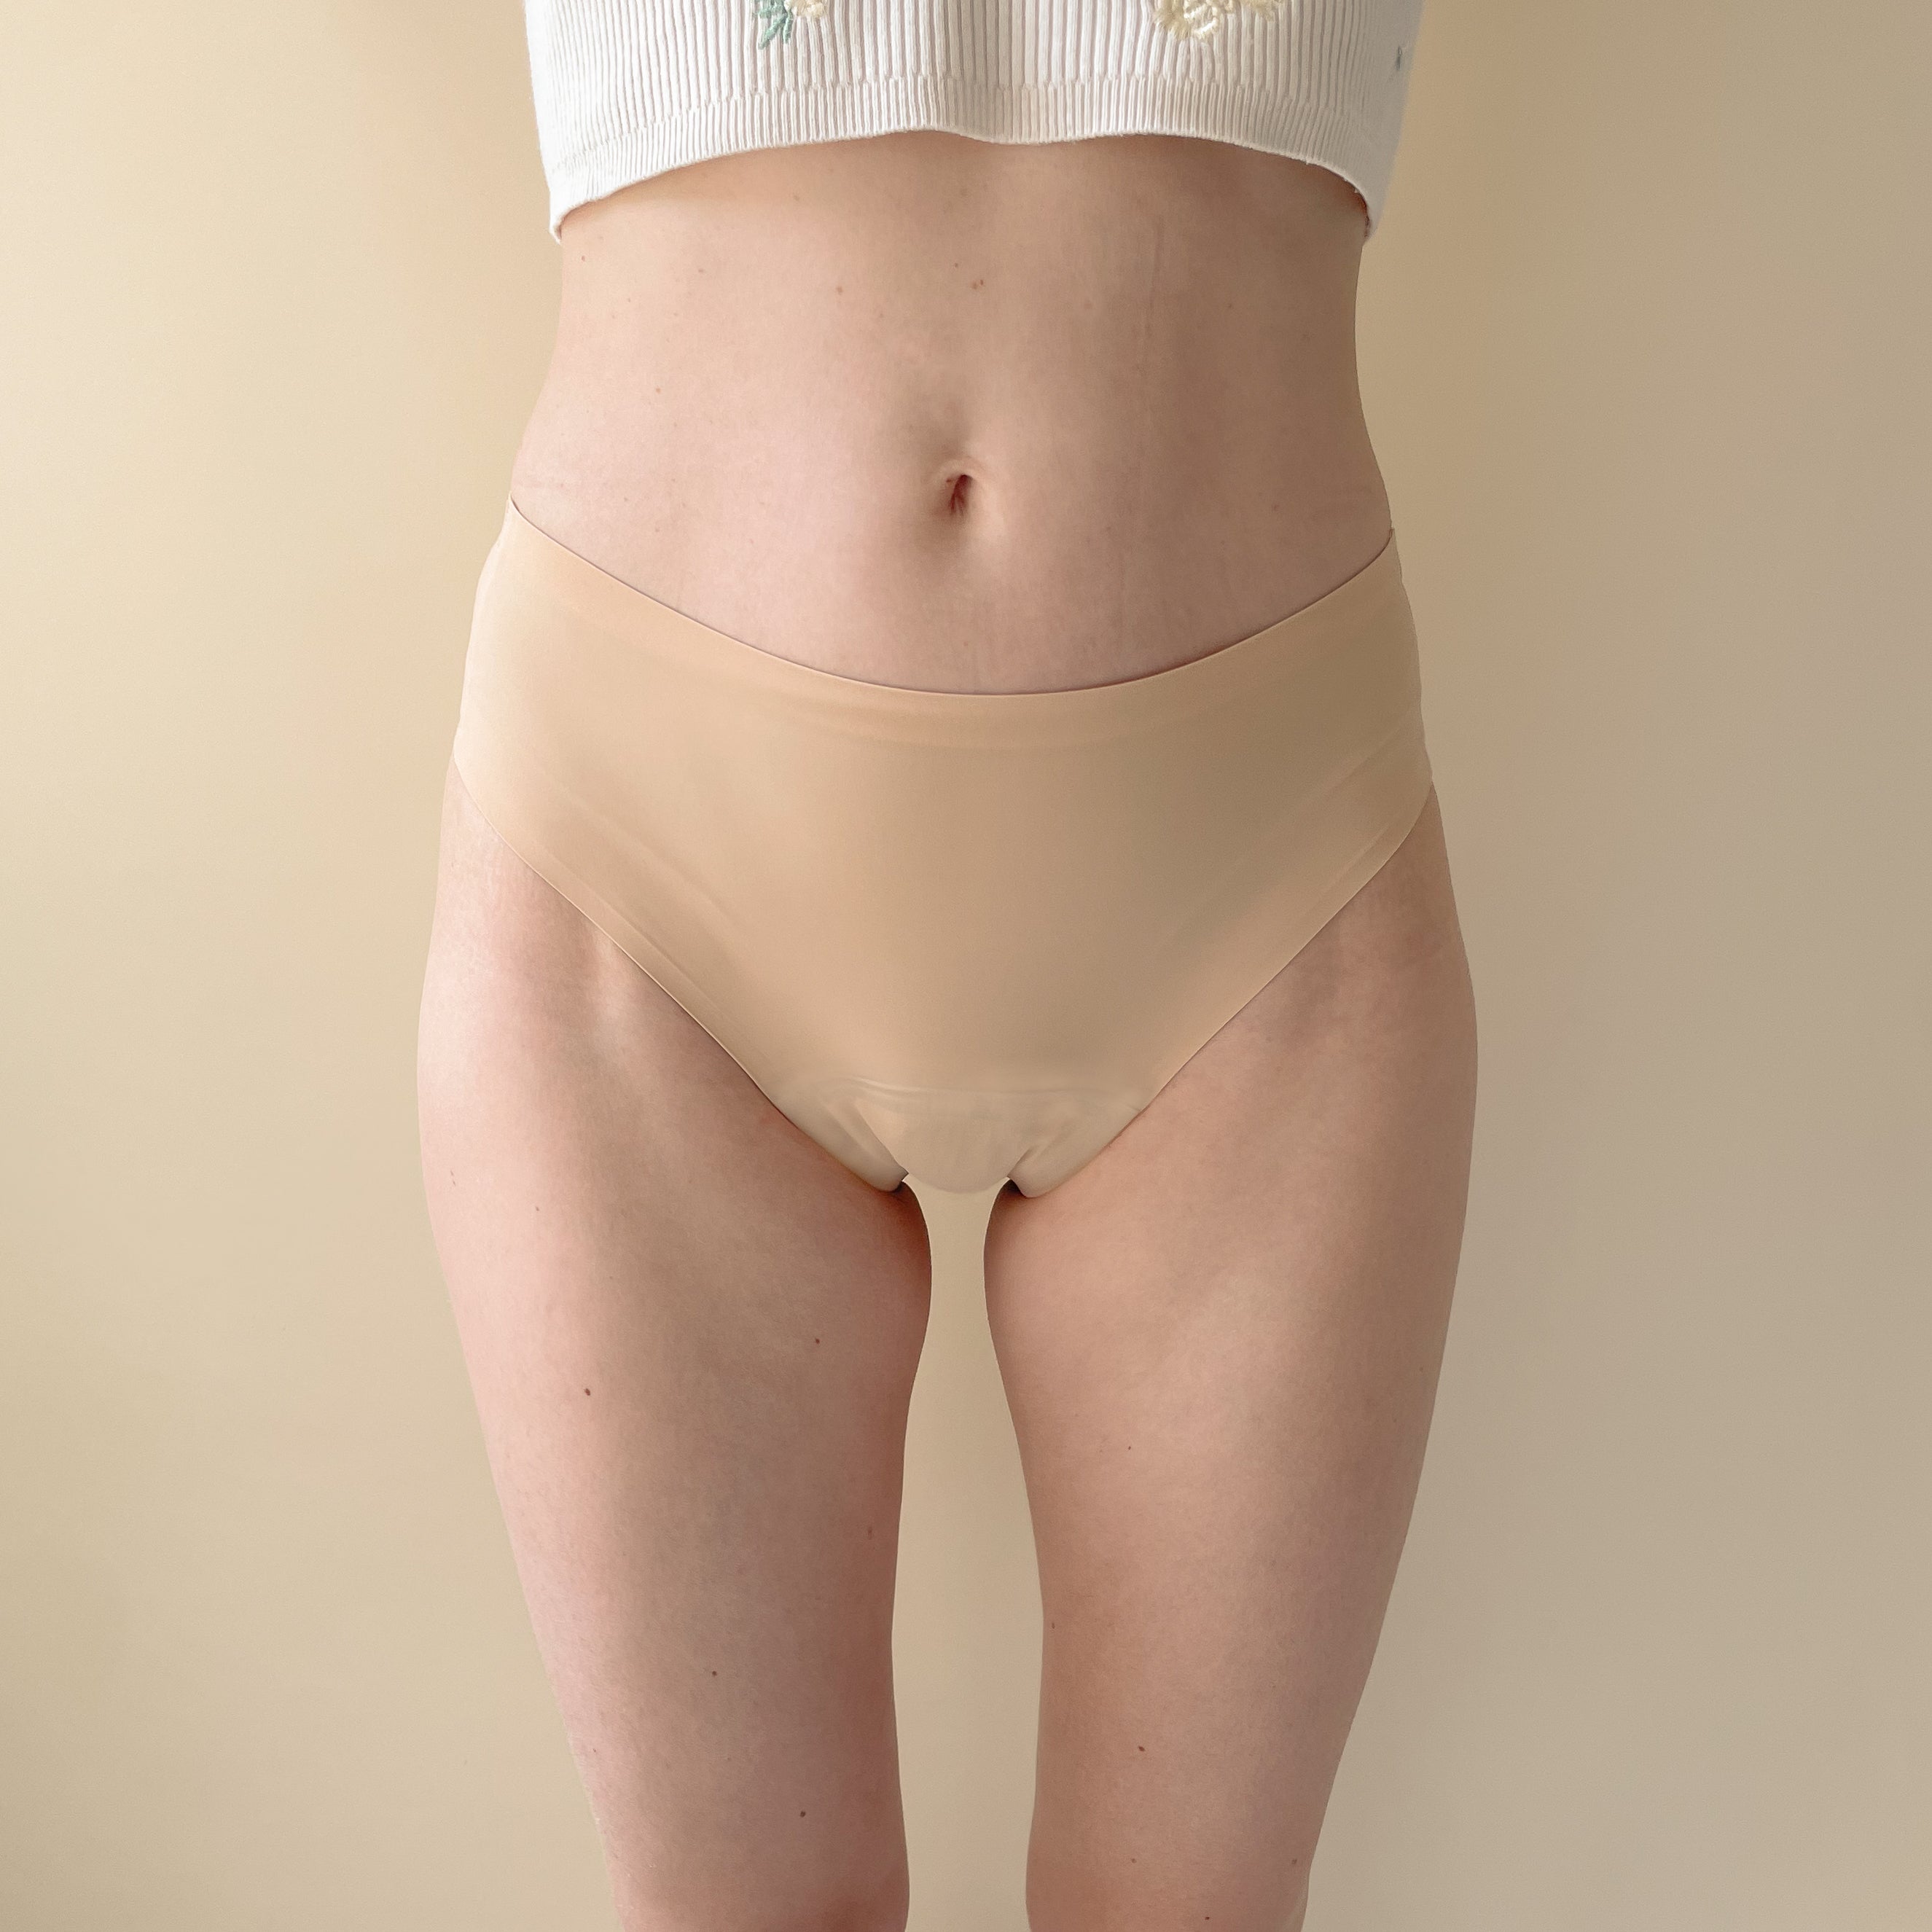 dais period underwear in cheeky cut in beige colour shown on model from the front.